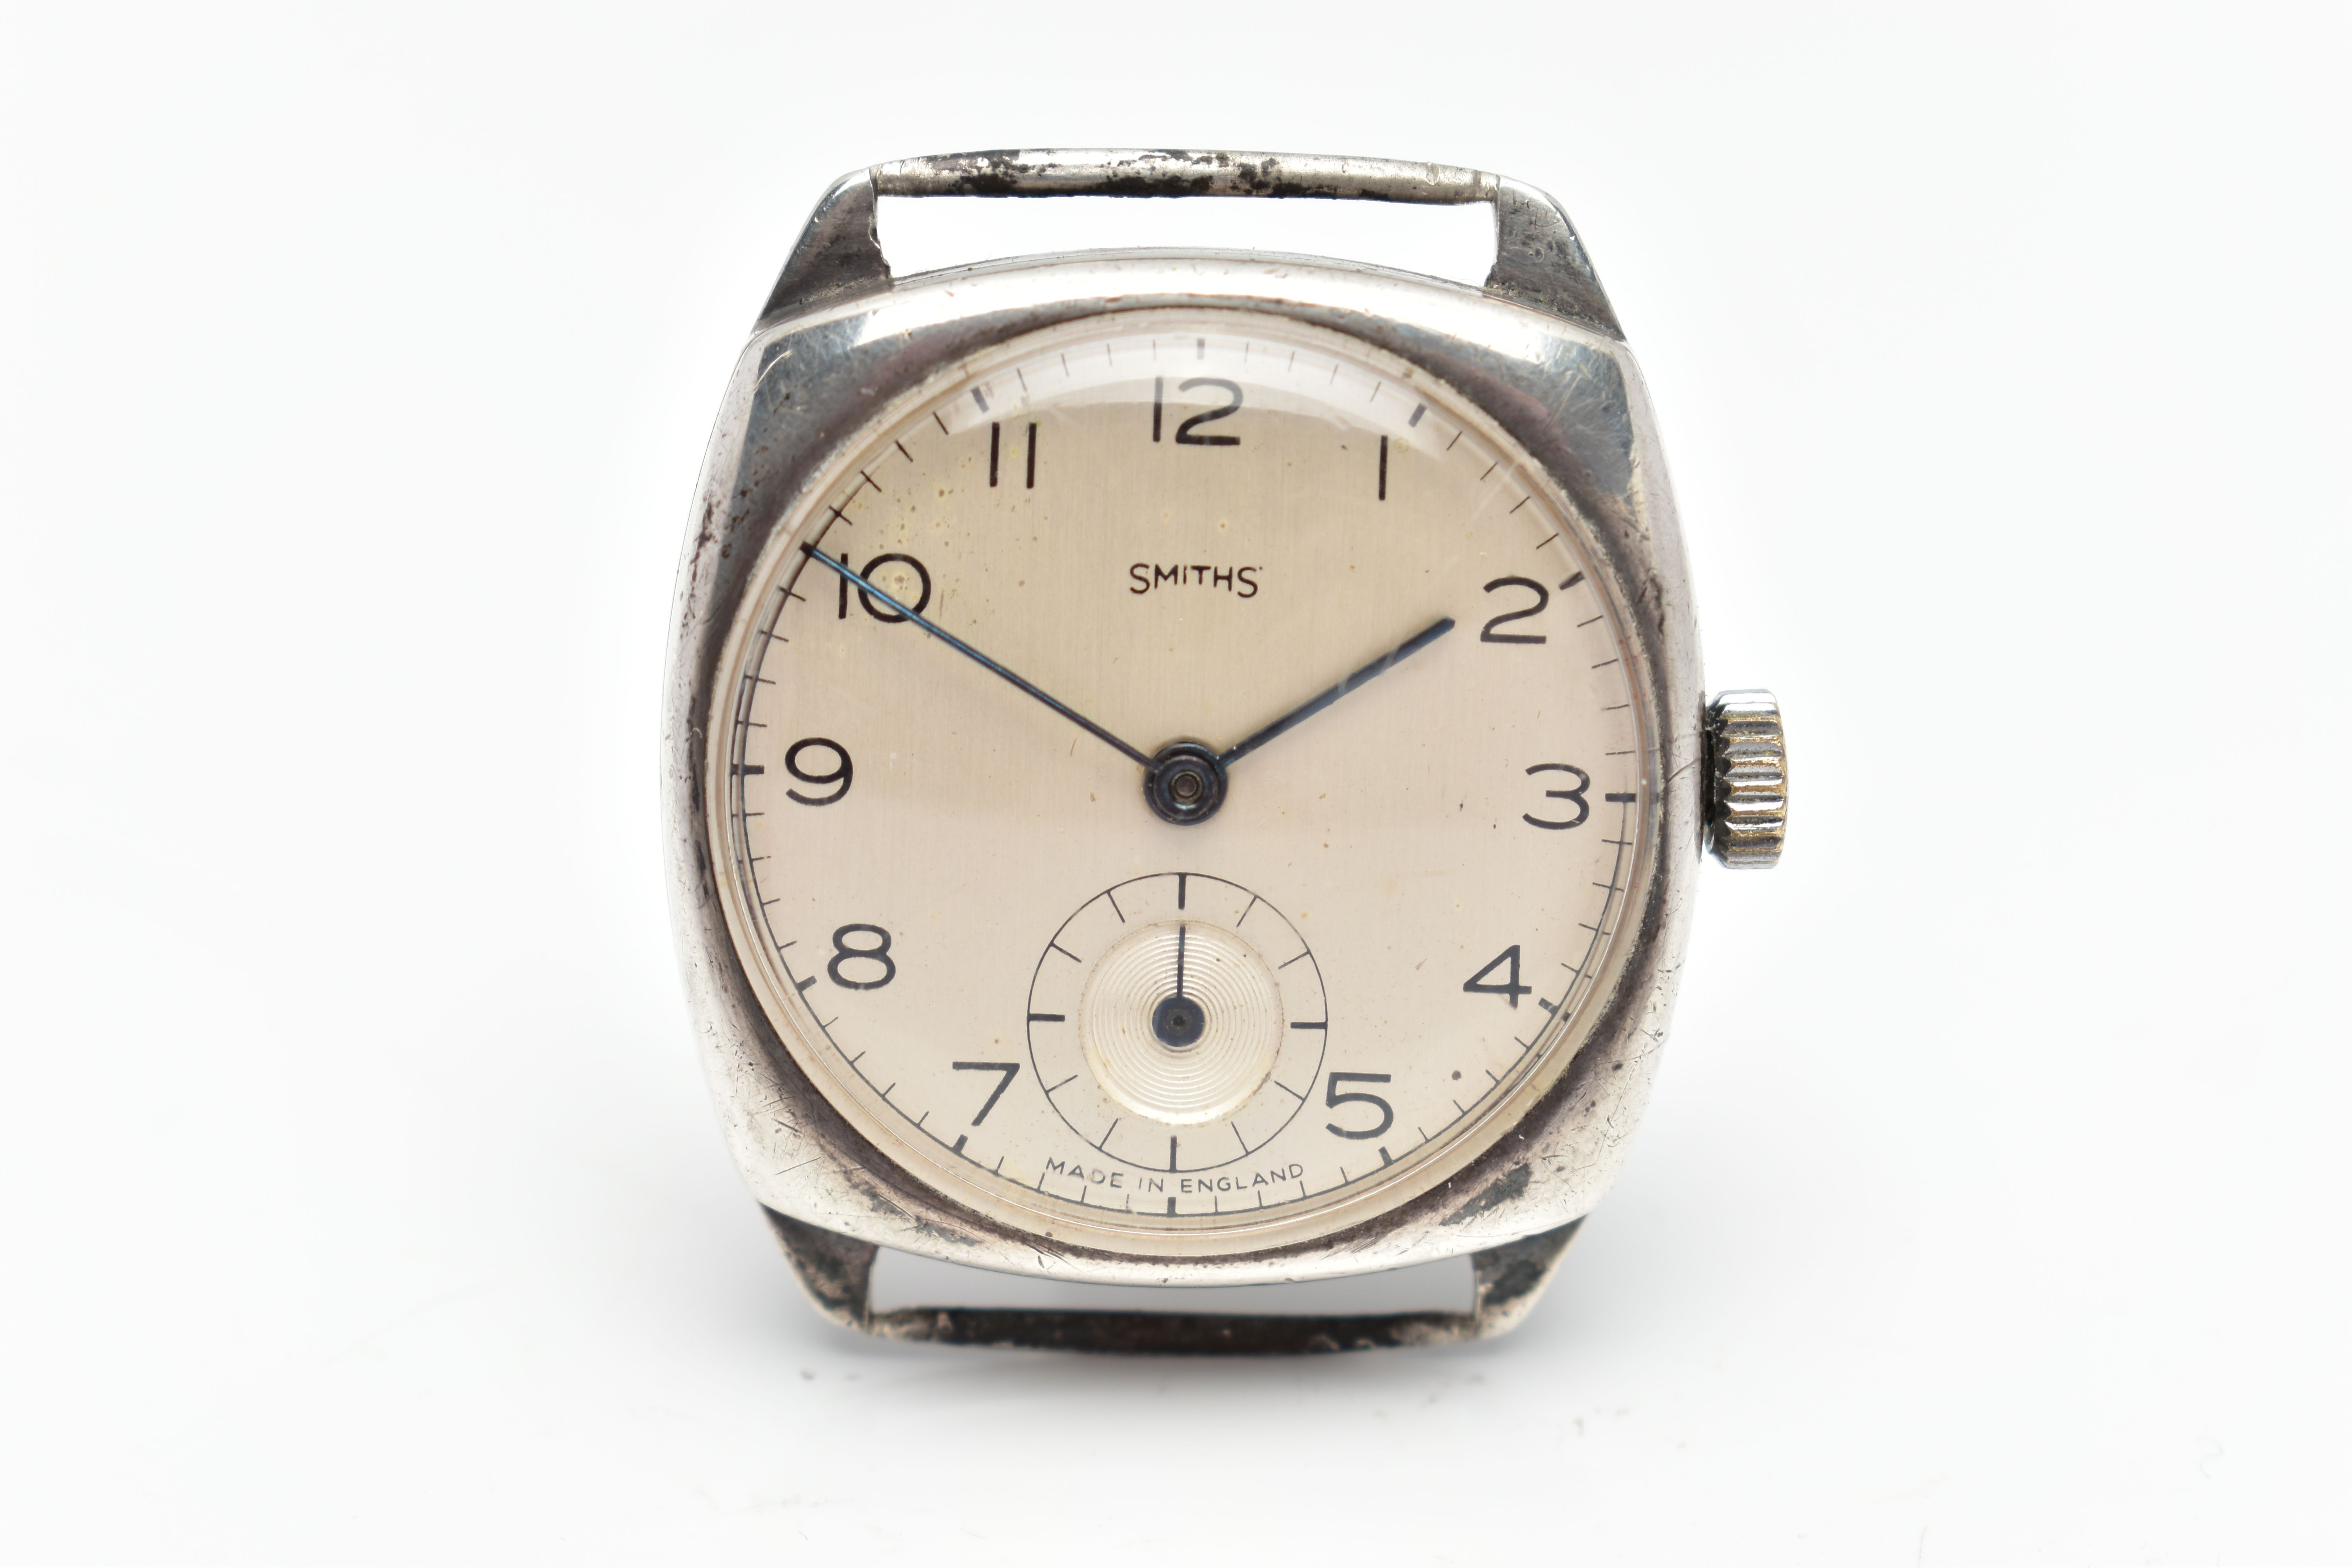 A WHITE METAL SMITHS WATCH HEAD, manual wind, cream colour dial, with Arabic hourly markers,